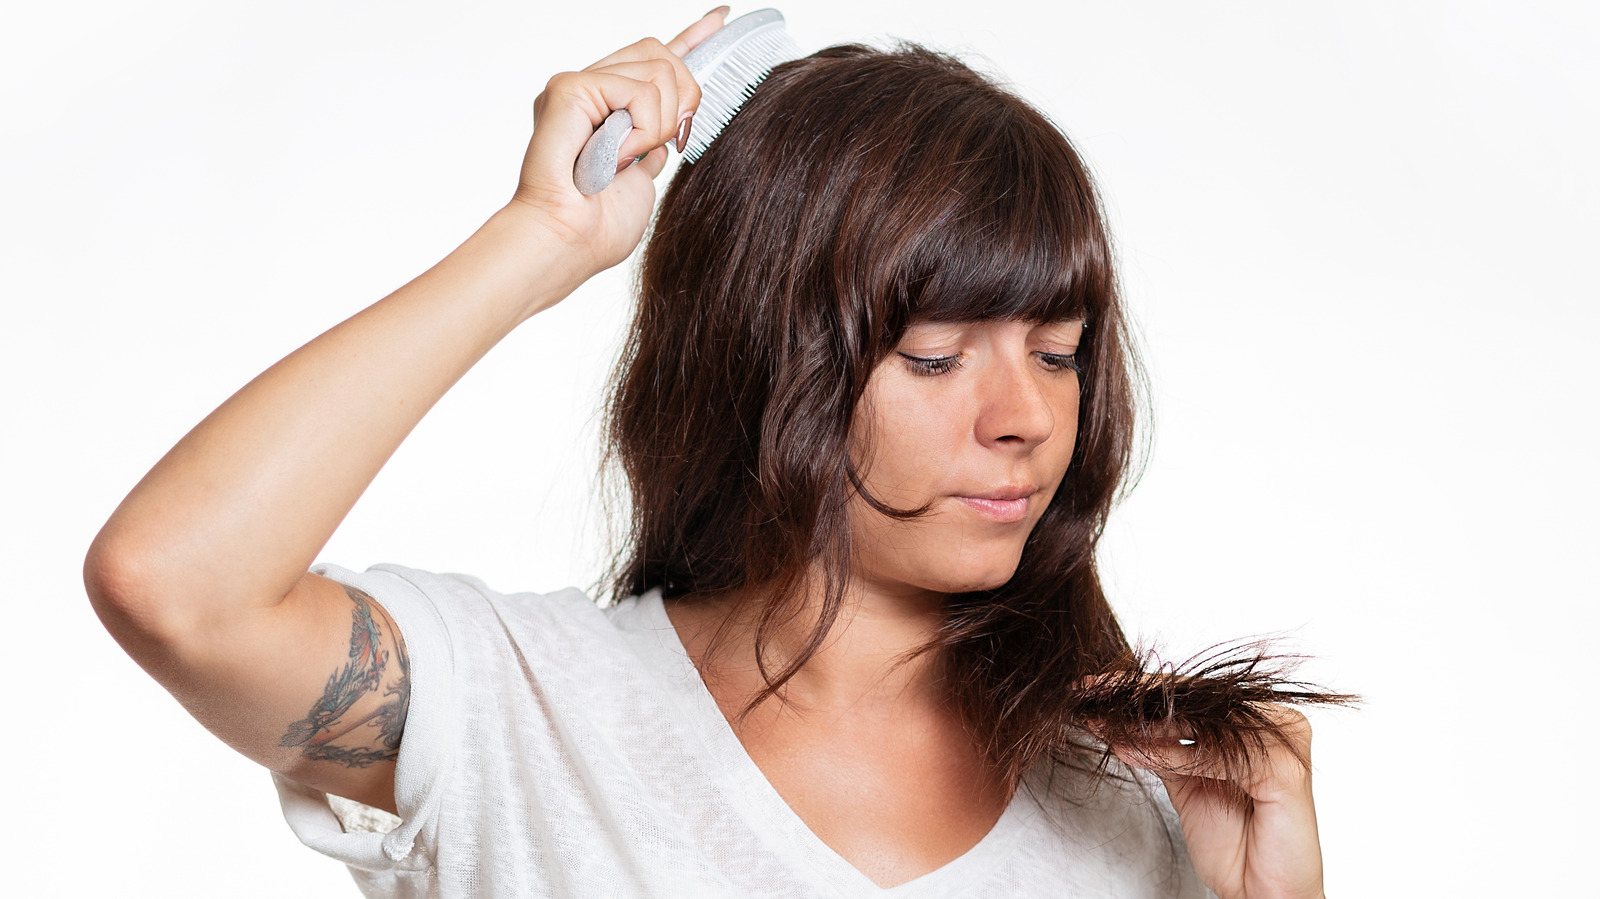 Never Pick Split Ends In Your Hair. Here are the reasons.